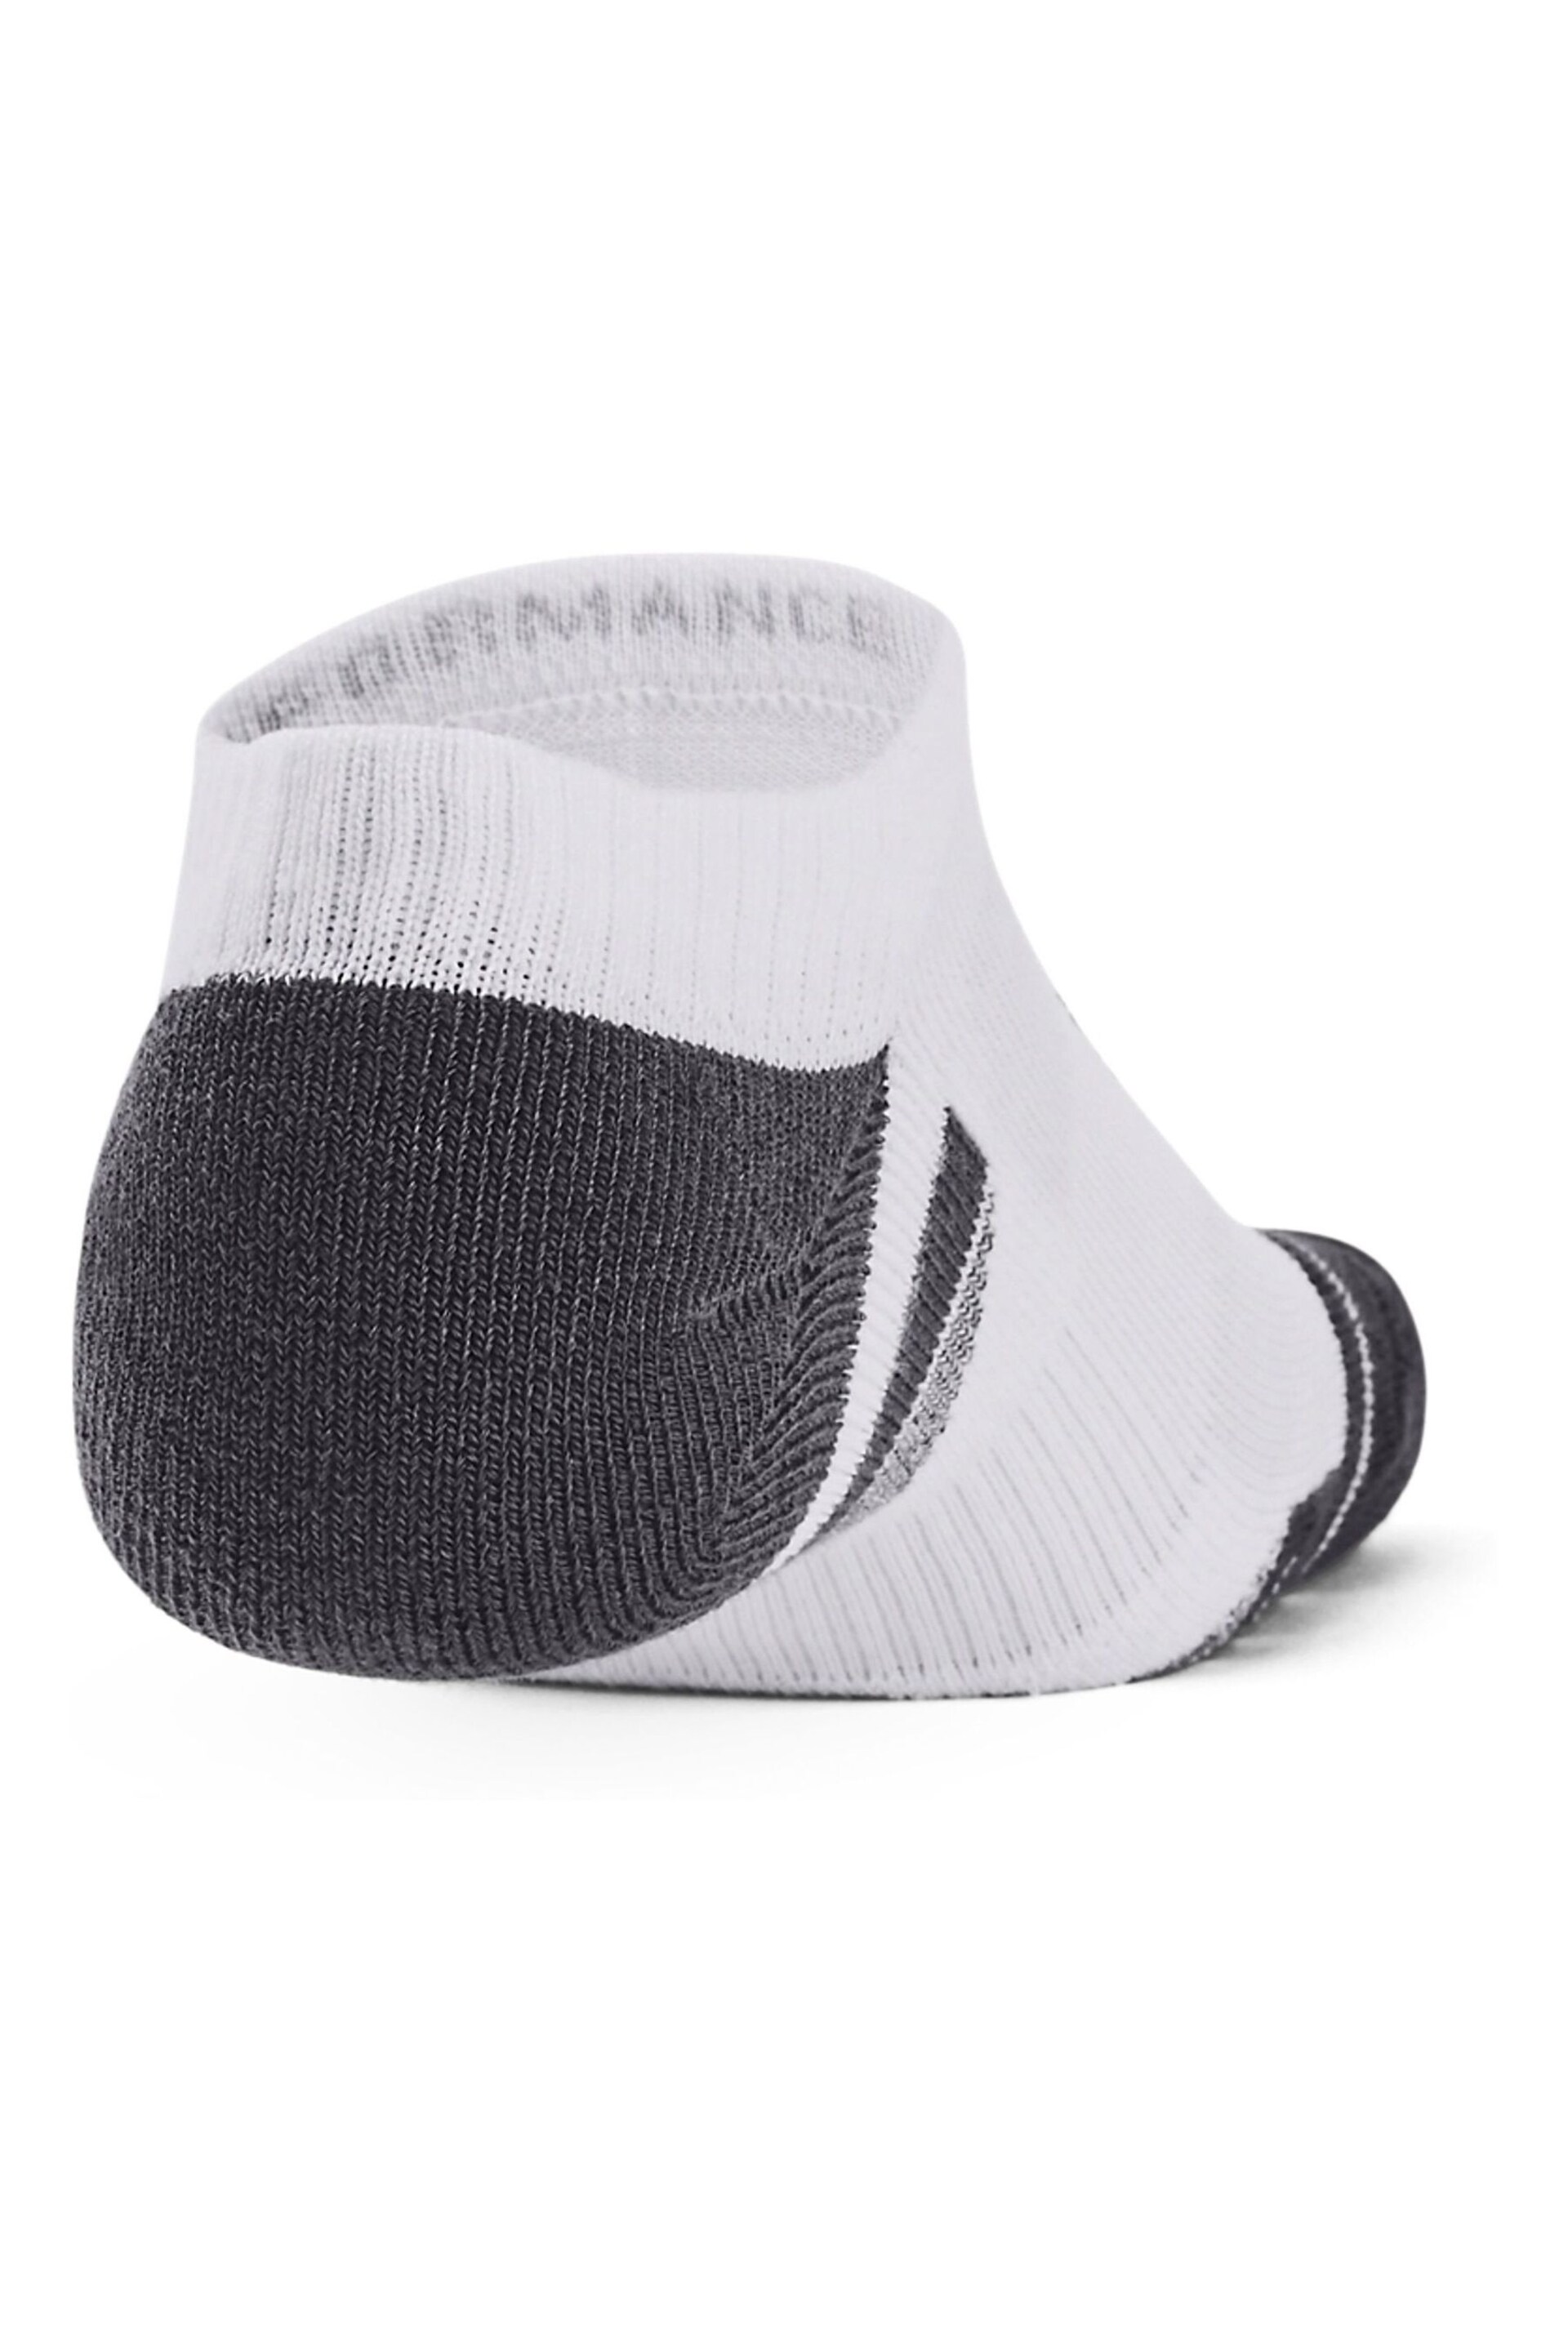 Under Armour White Performance Tech Socks 3 Pack - Image 5 of 5